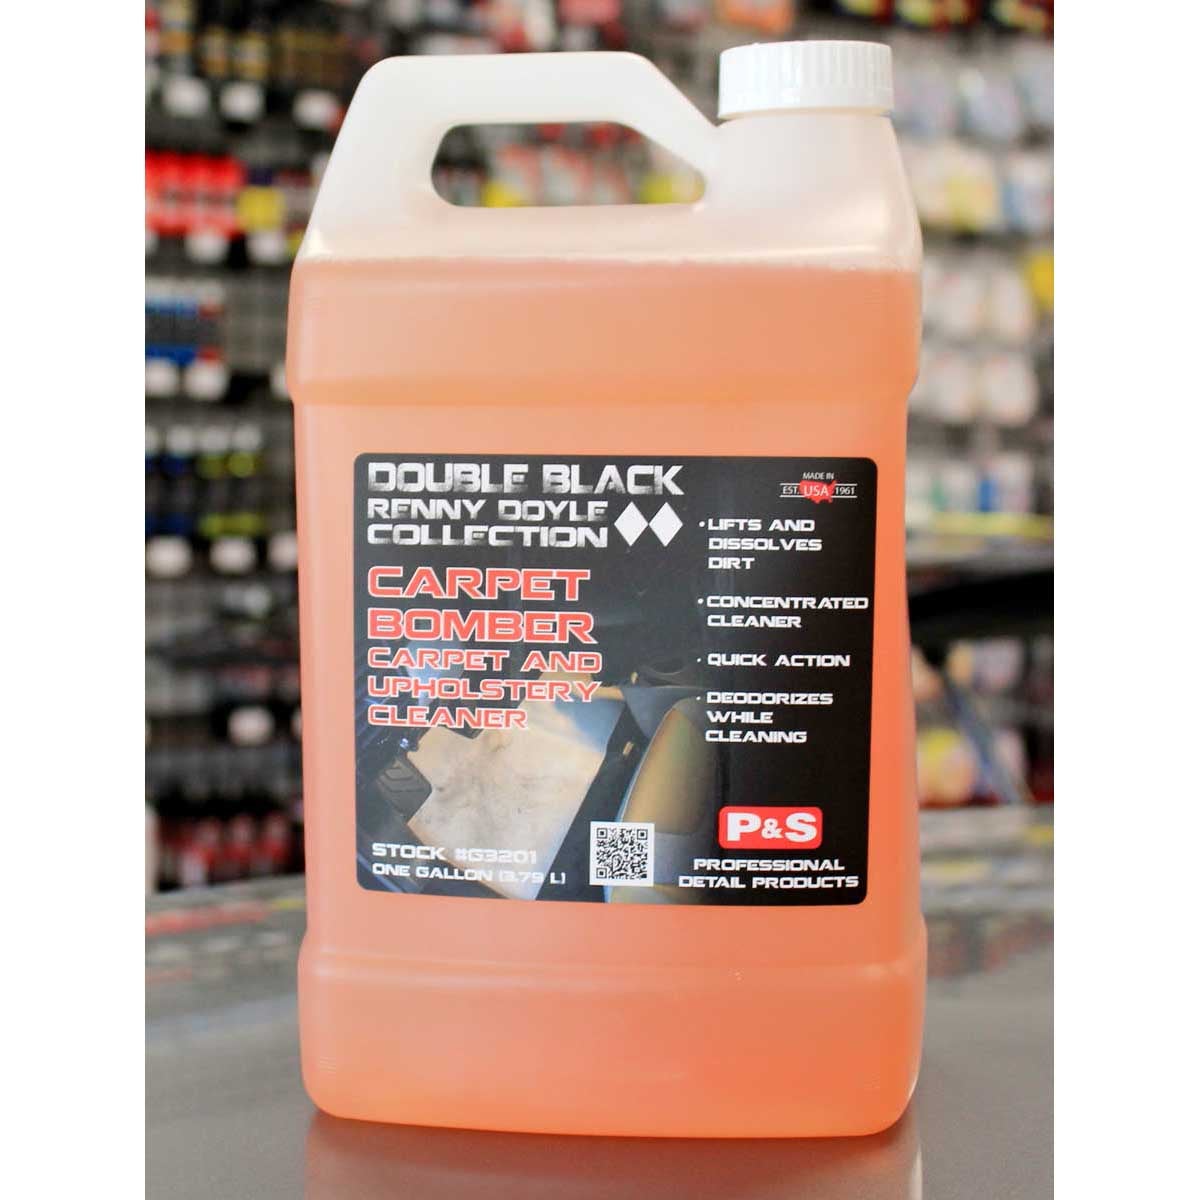 P&S Carpet Bomber - Carpet & Upholstery Cleaner — Detailers Choice Car Care